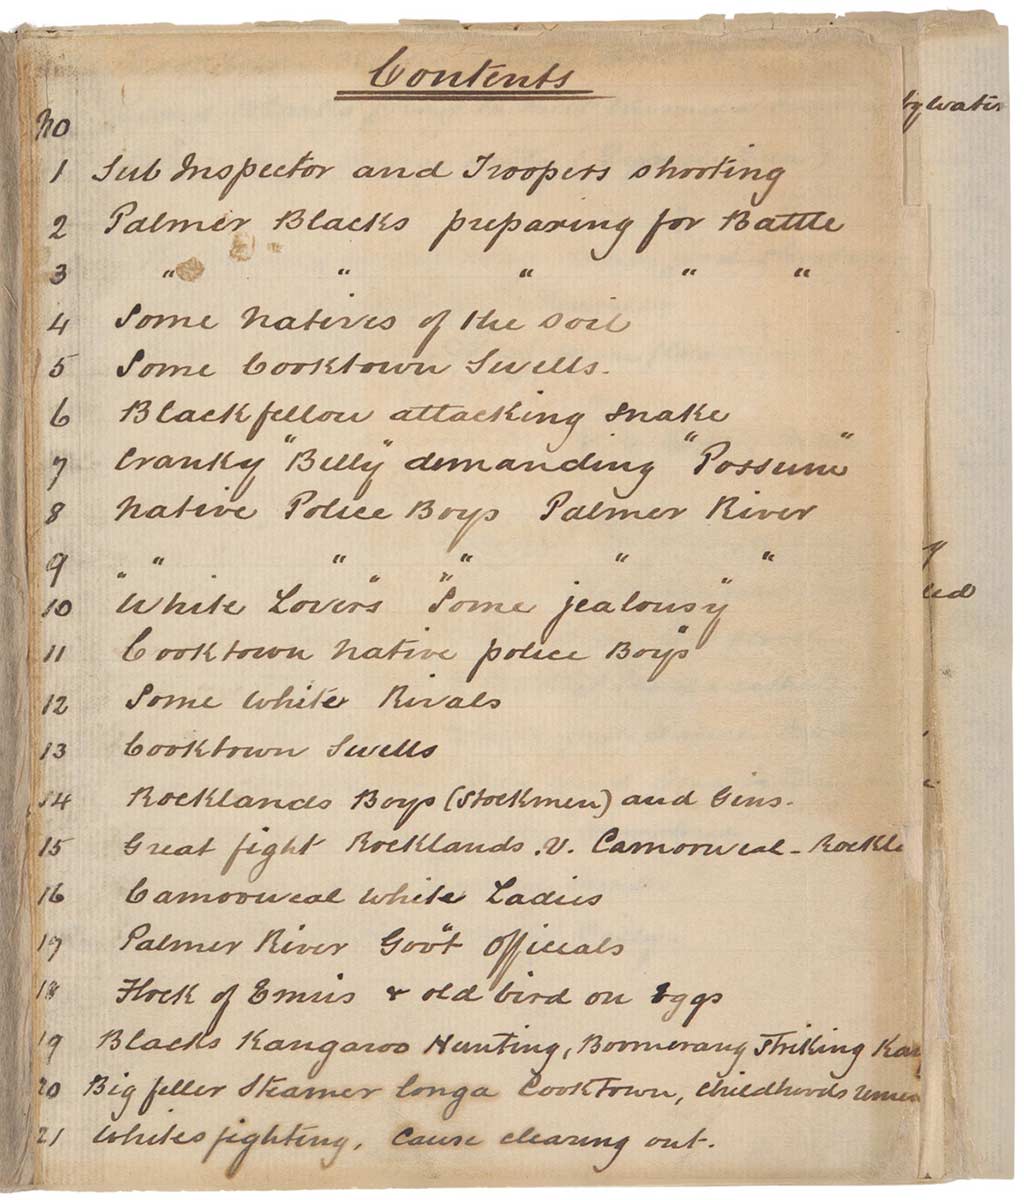 Handwritten contents page of a sketchbook. - click to view larger image